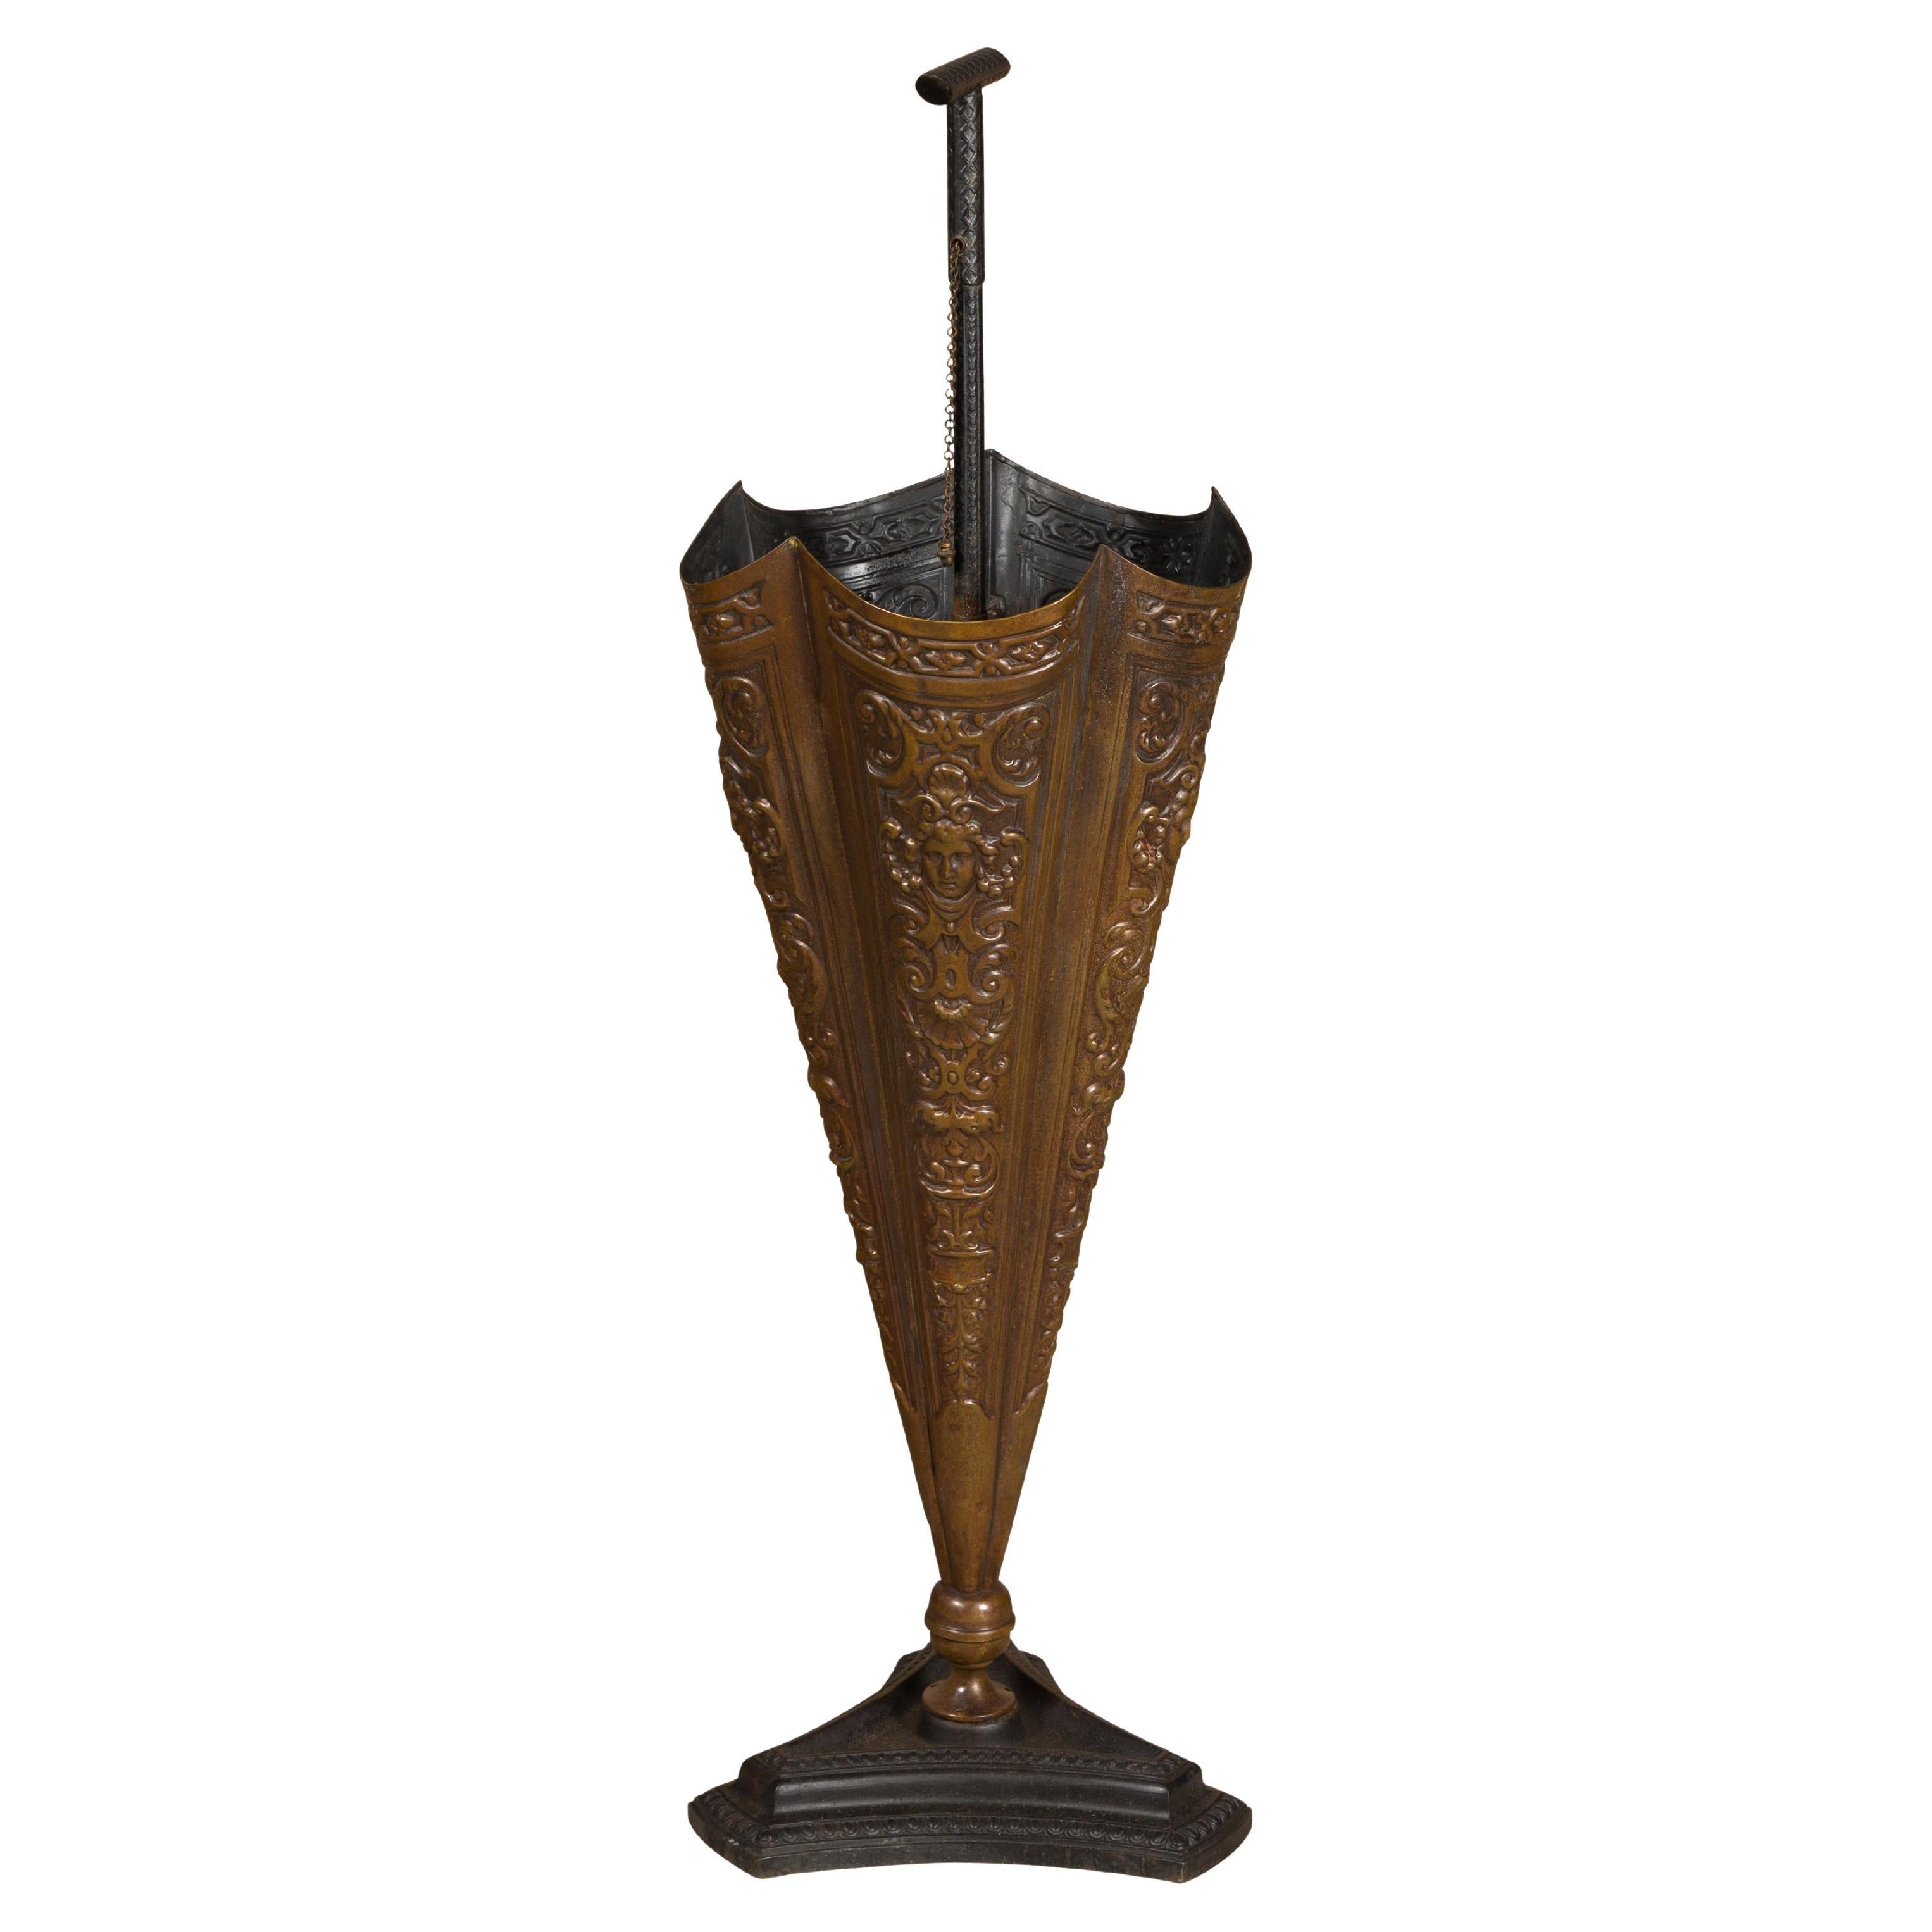 English 1920-1930 Brass Umbrella Stand with Raised Motifs and Tripartite Base